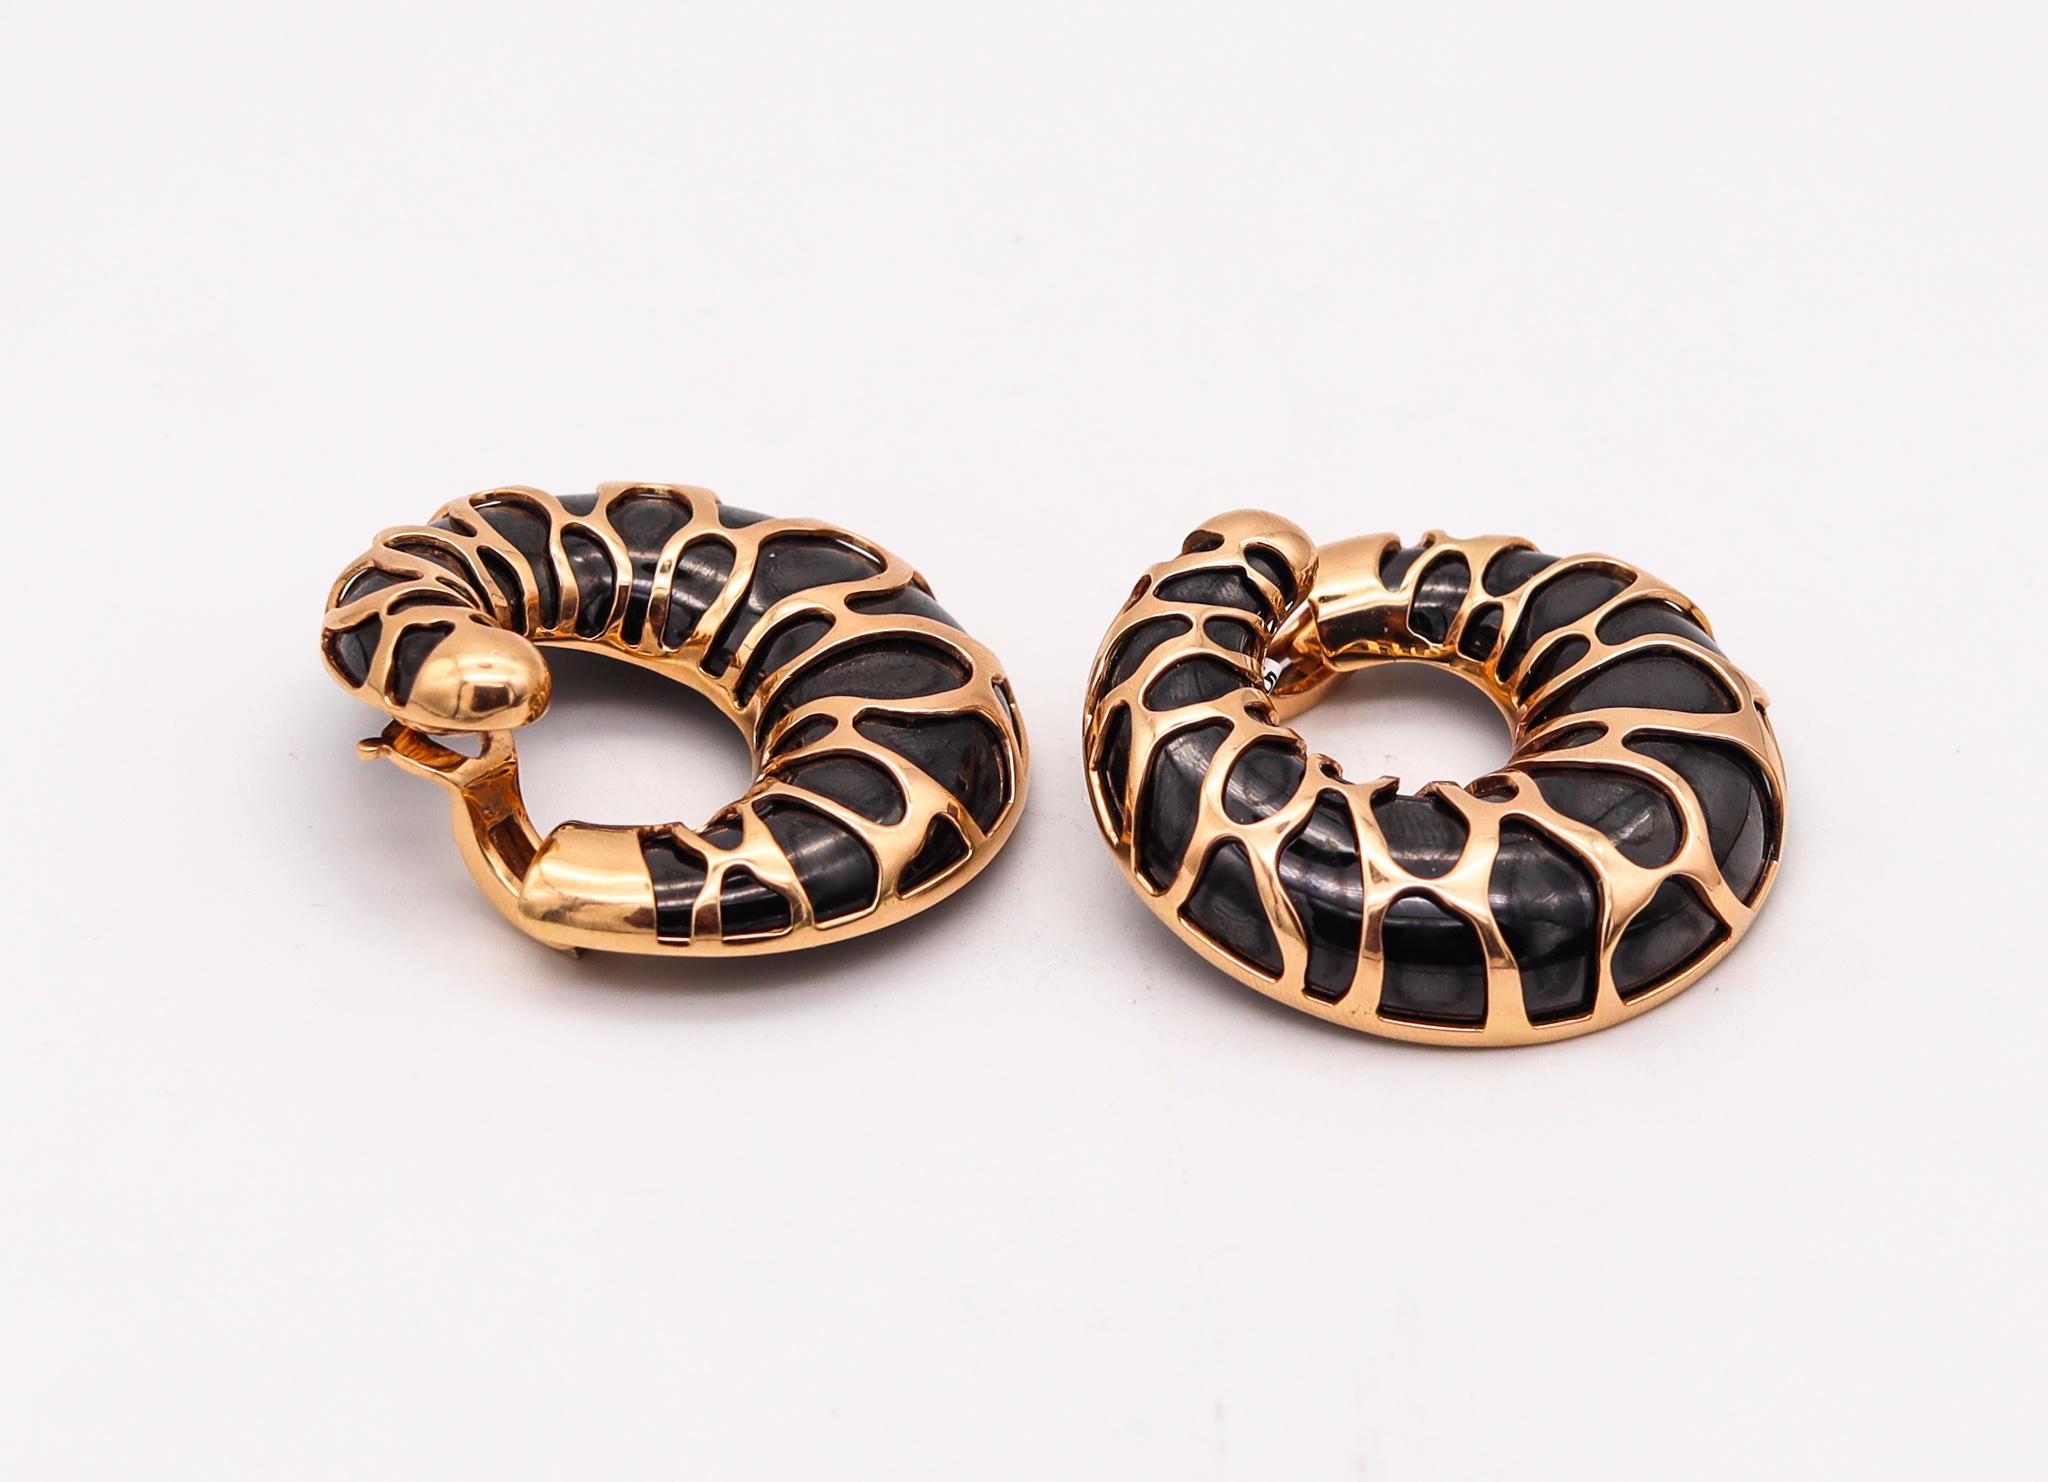 Marina B. Milan Funny Giraffe Pattern Earrings in 18kt Yellow and Blackened Gold In New Condition For Sale In Miami, FL